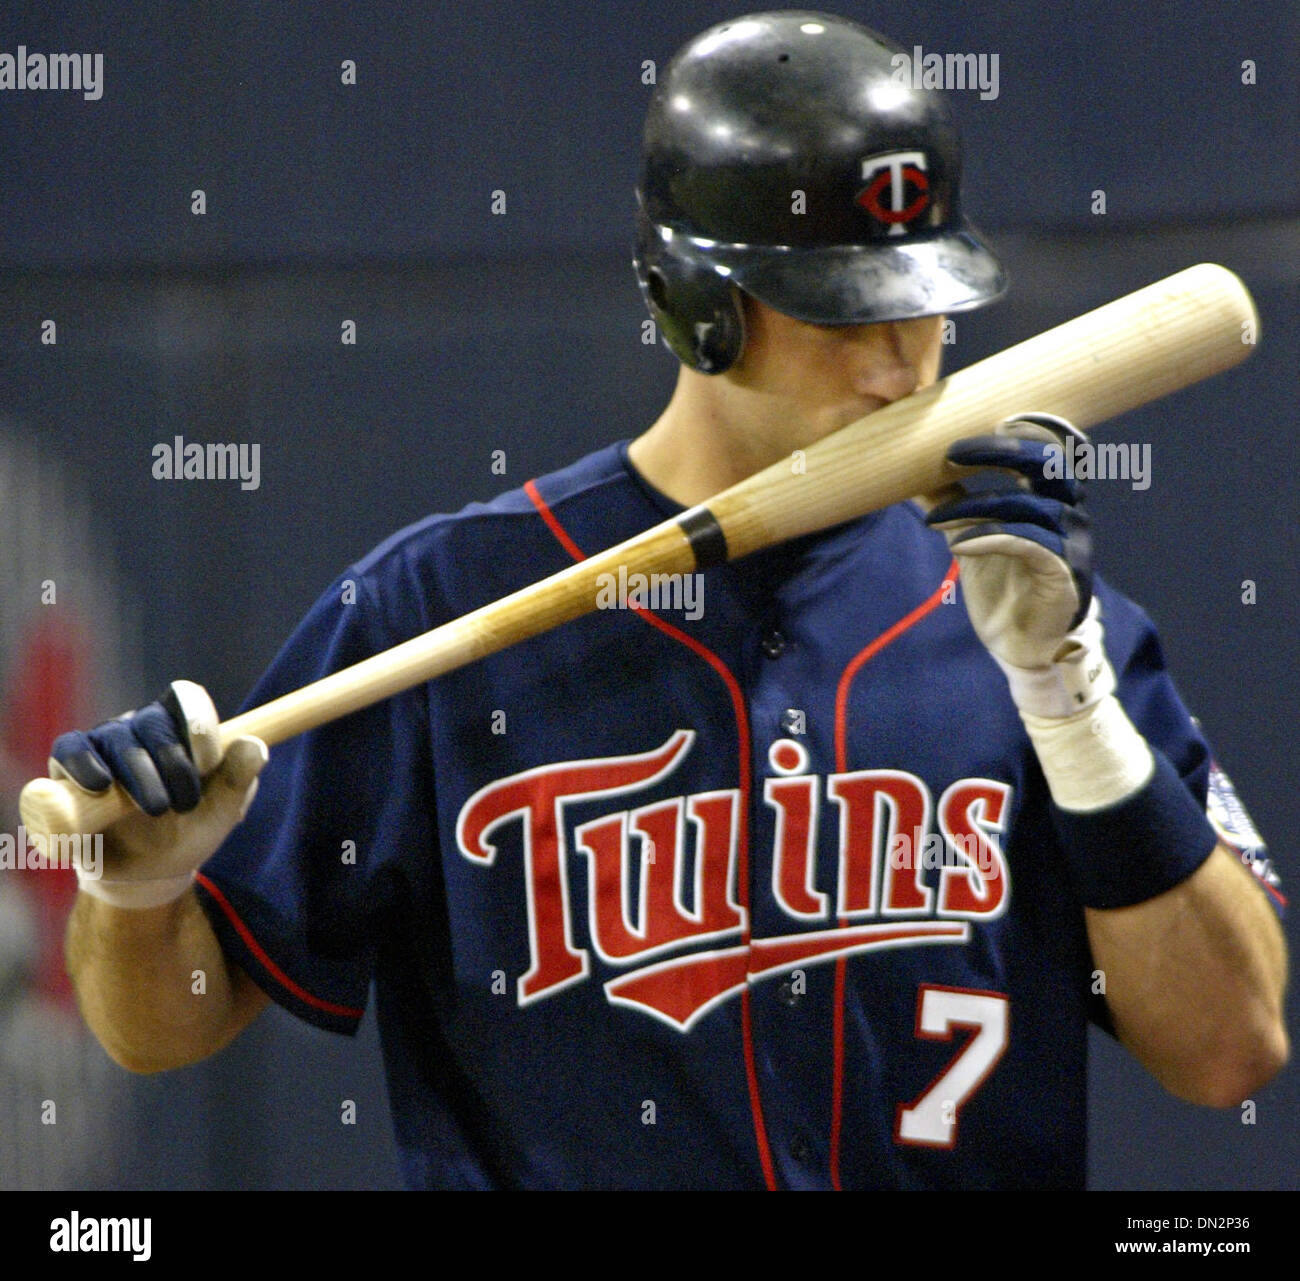 Oct 01, 2006; Minneapolis, MN, USA; Twin JOE MAUER kisses his bat before one of his plate appearances against White Sox pitching, Sunday. Mandatory Credit: Photo by Marlin Levison/Minneapolis Star T/ZUMA Press. (©) Copyright 2006 by Minneapolis Star T Stock Photo